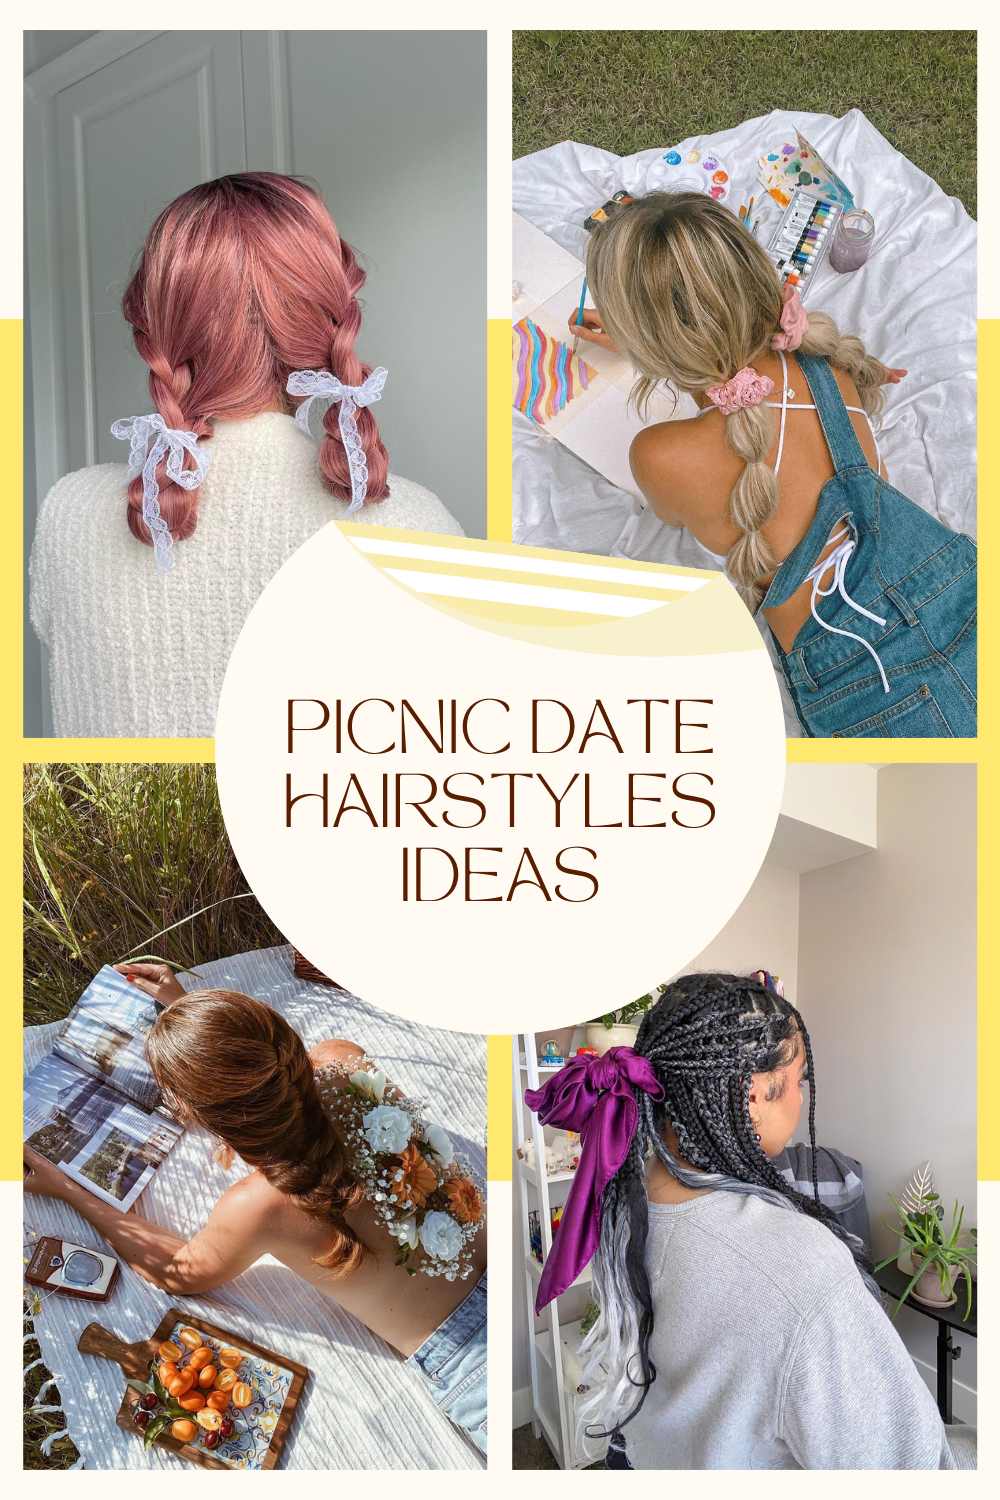 Picnic Date Hairstyles Ideas